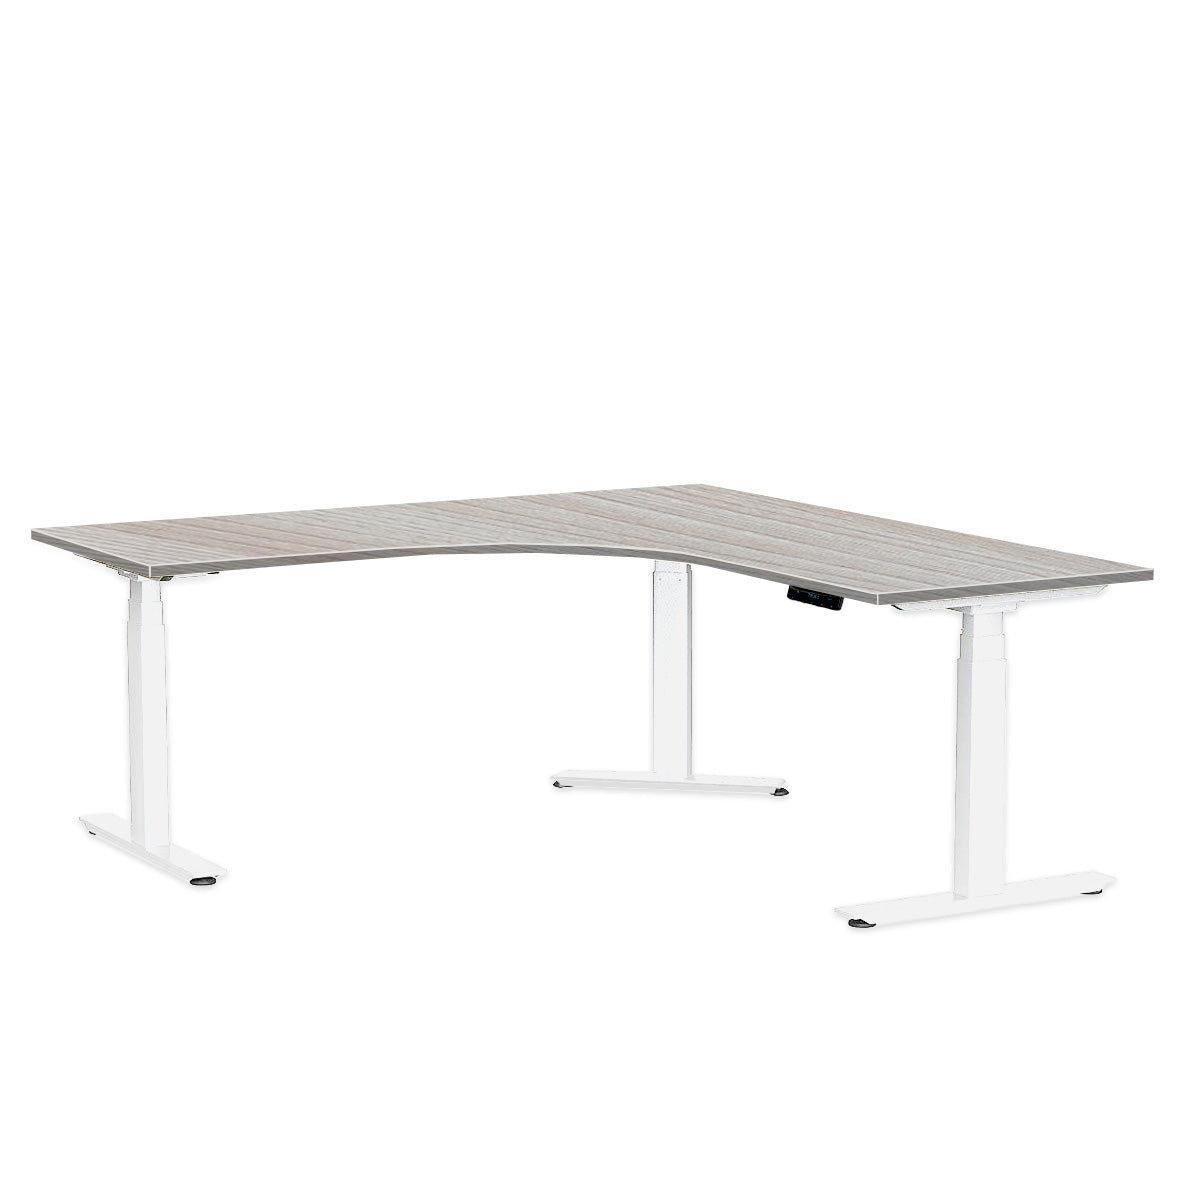 L-Shaped Extended Signature Standing Desk, Customized MFC Tabletop